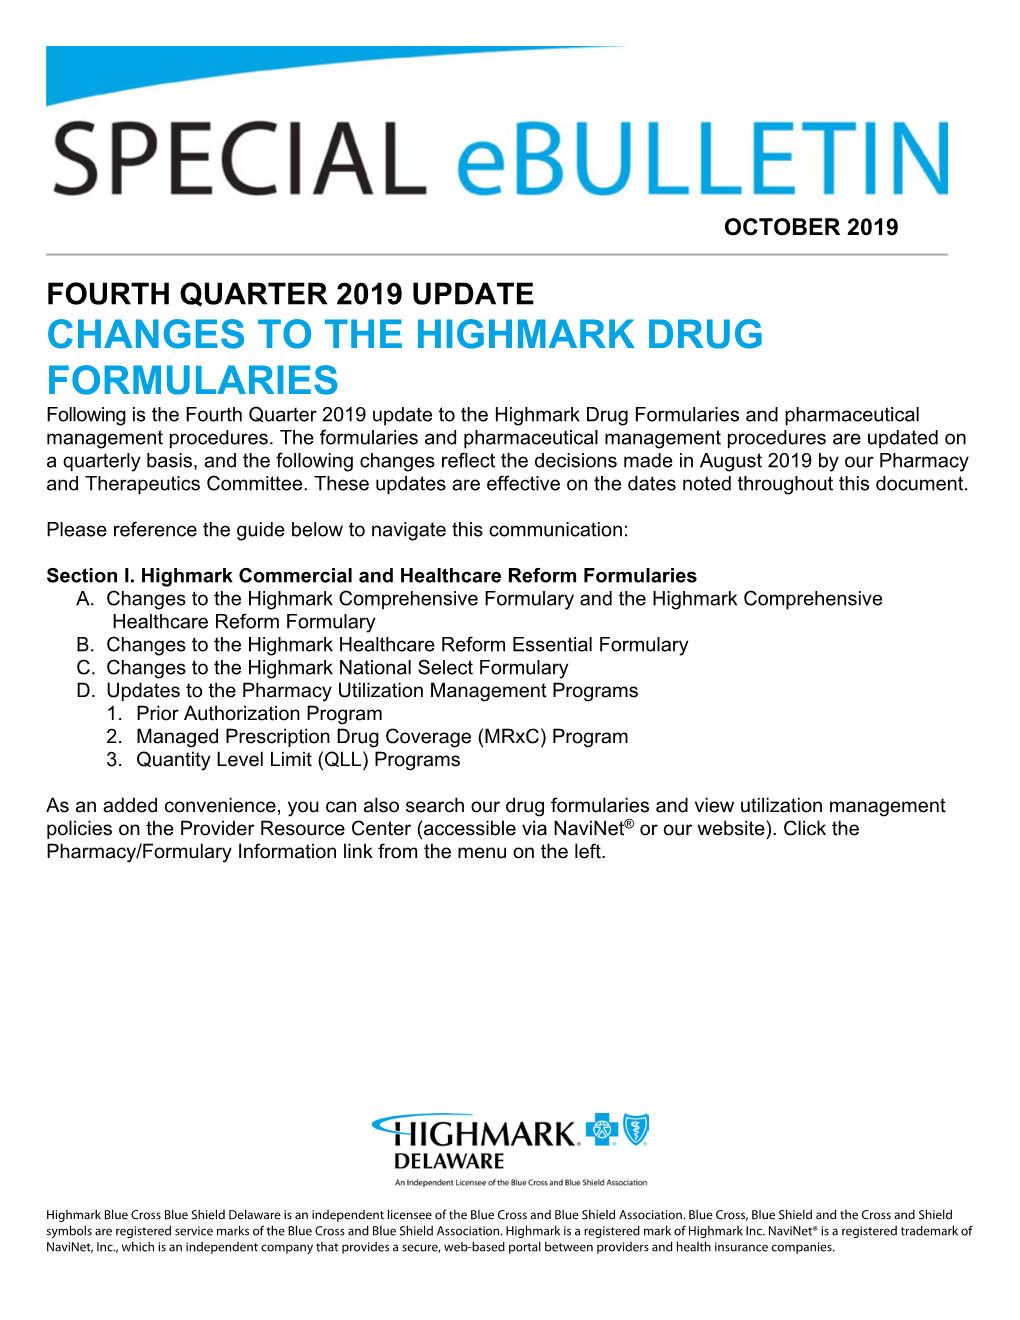 CHANGES to the HIGHMARK DRUG FORMULARIES Following Is the Fourth Quarter 2019 Update to the Highmark Drug Formularies and Pharmaceutical Management Procedures